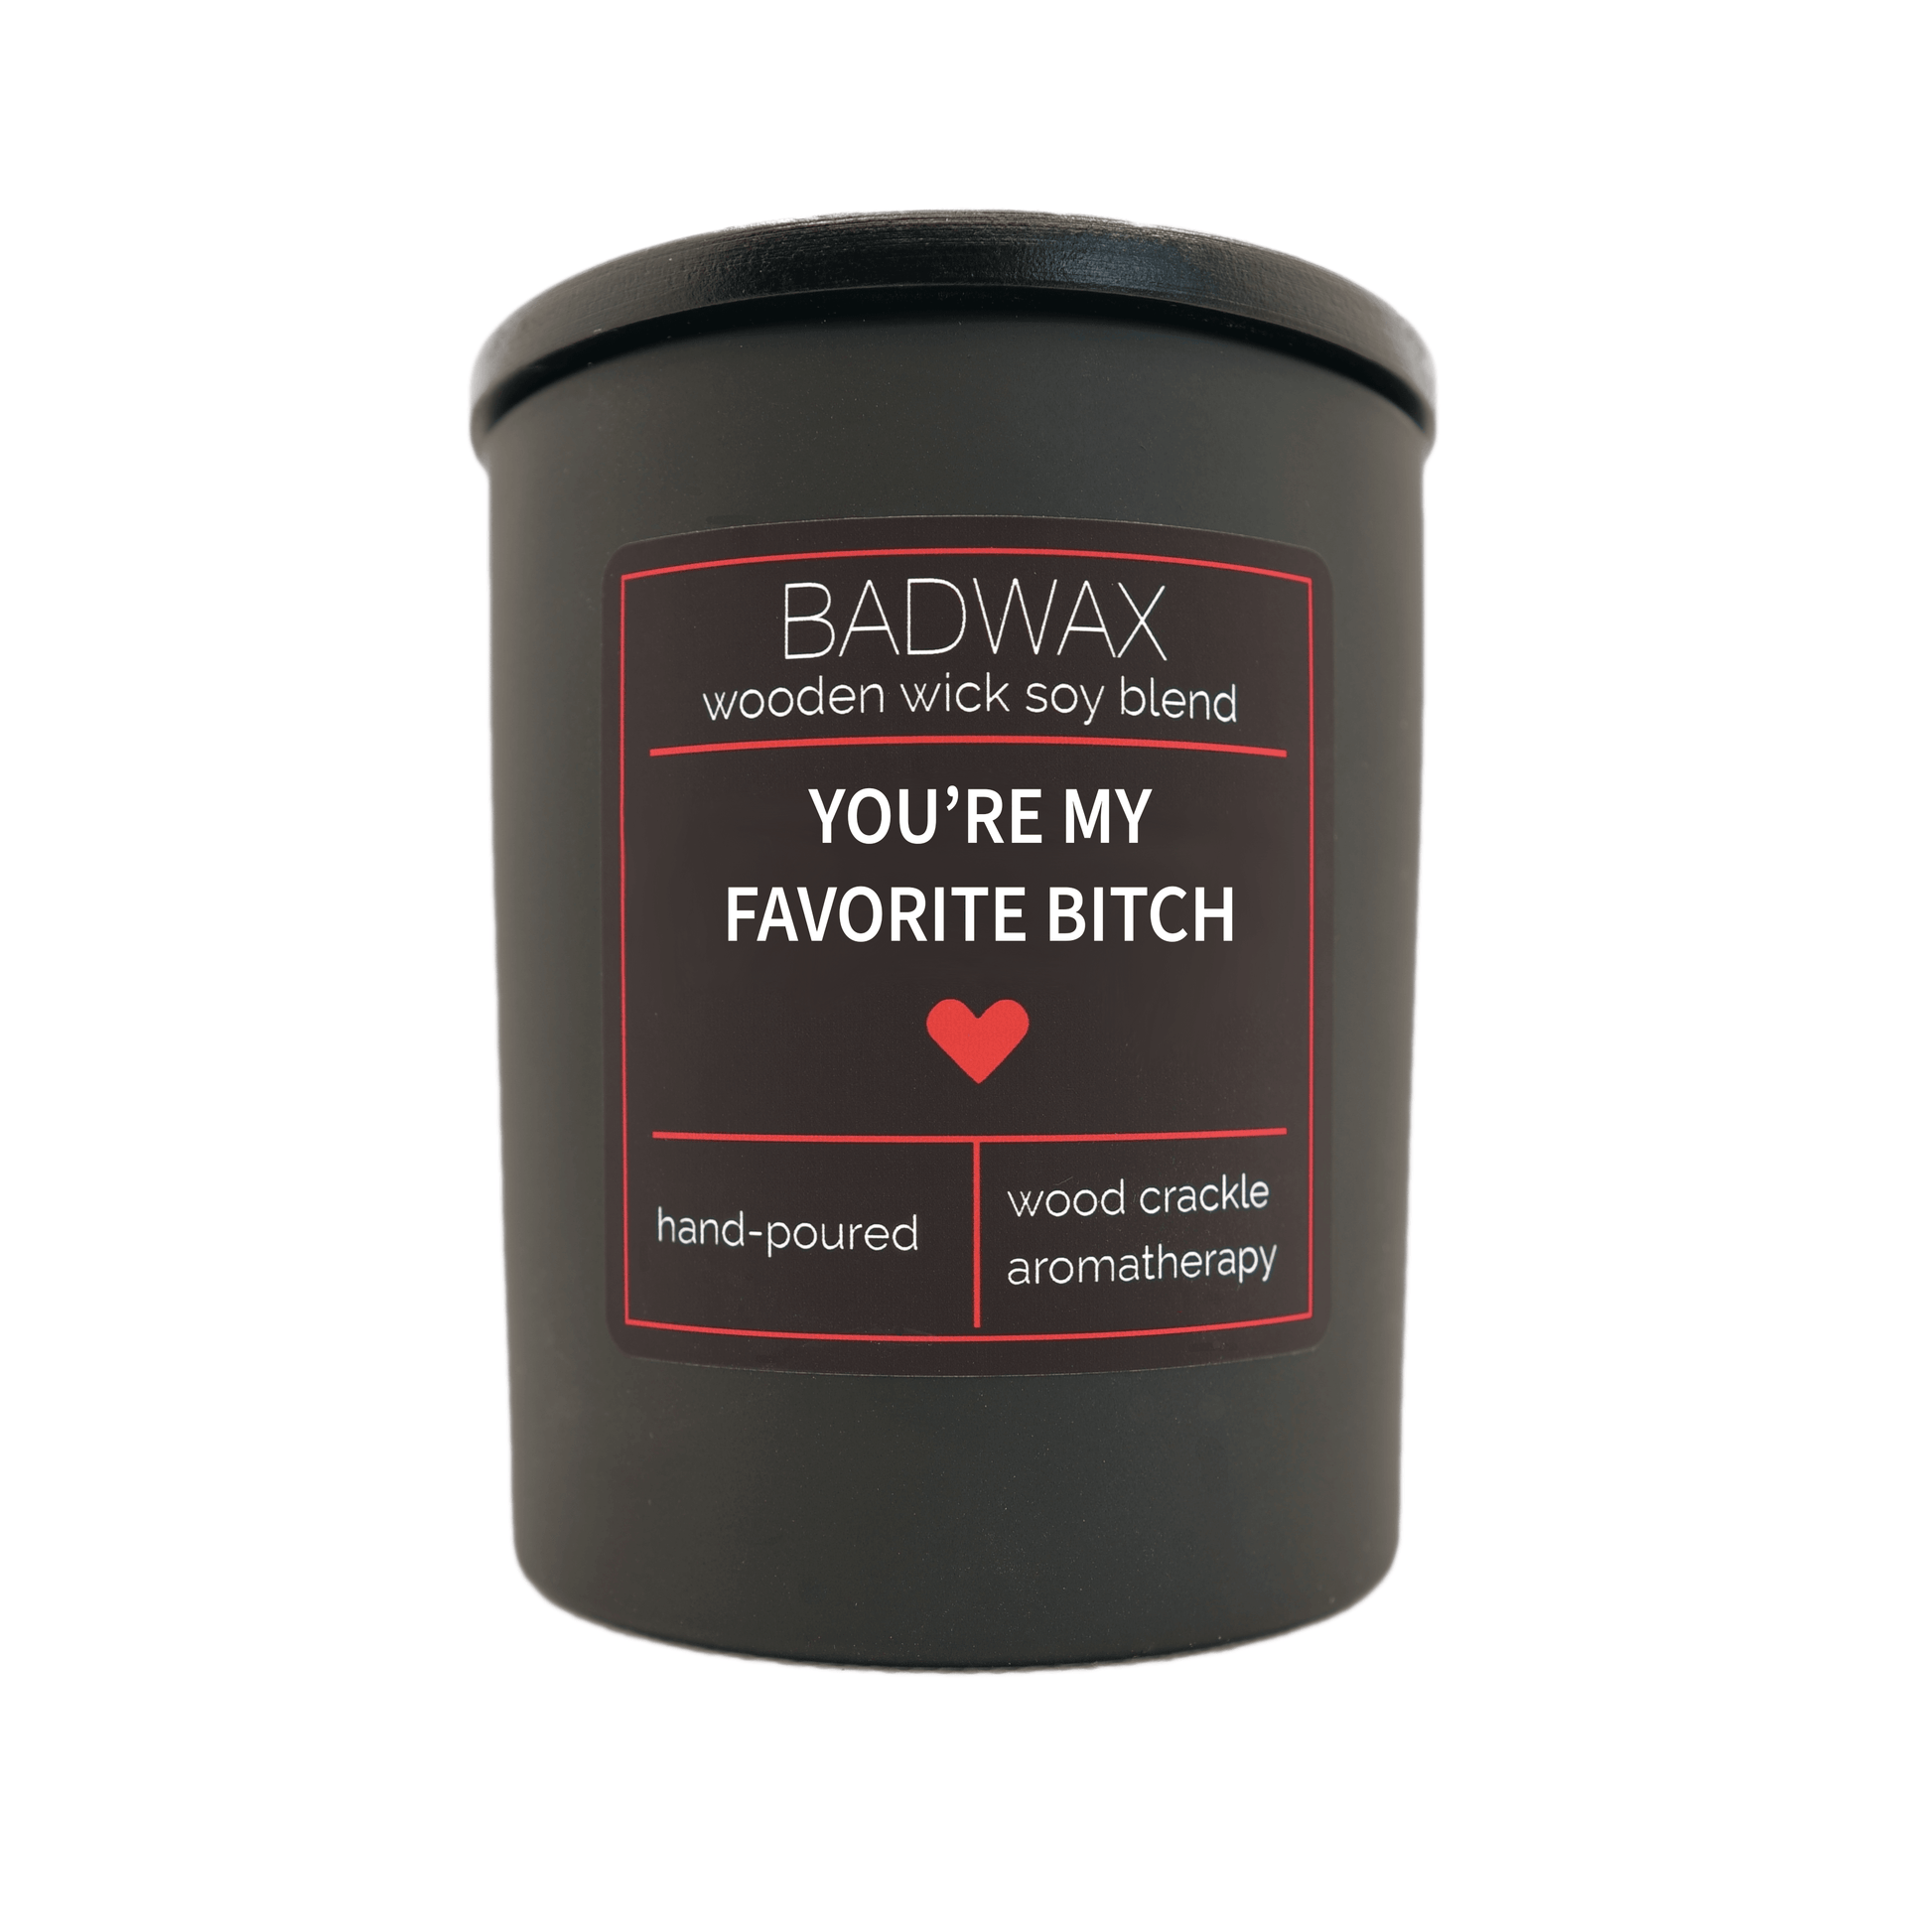 You're My Favorite Bitch - Woodwick Candle - BADWAX